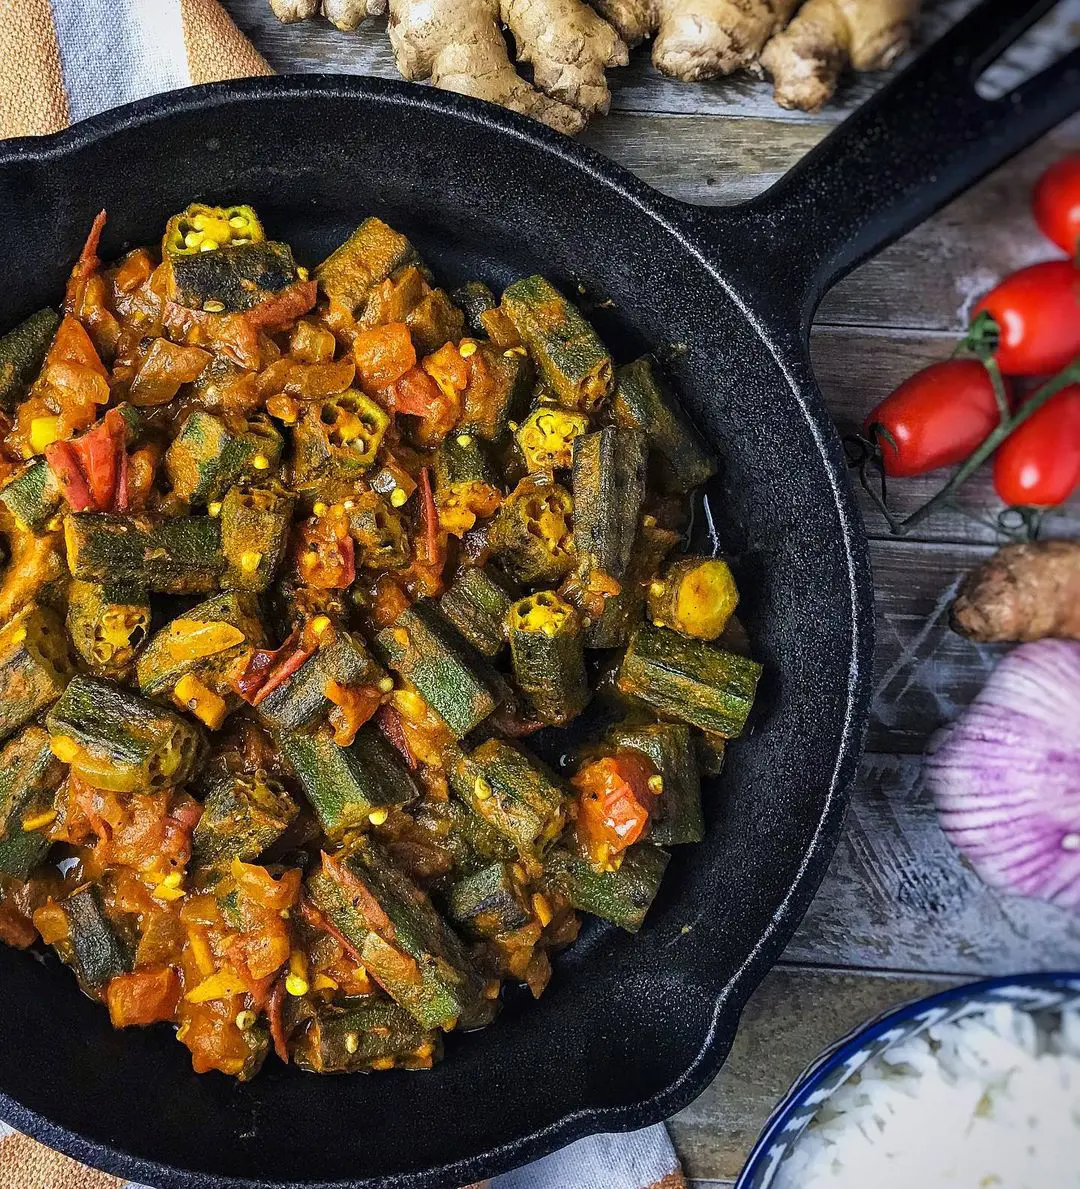 Bhindi Masala is a common curry recipe in India, especially famous in Northern part of the country